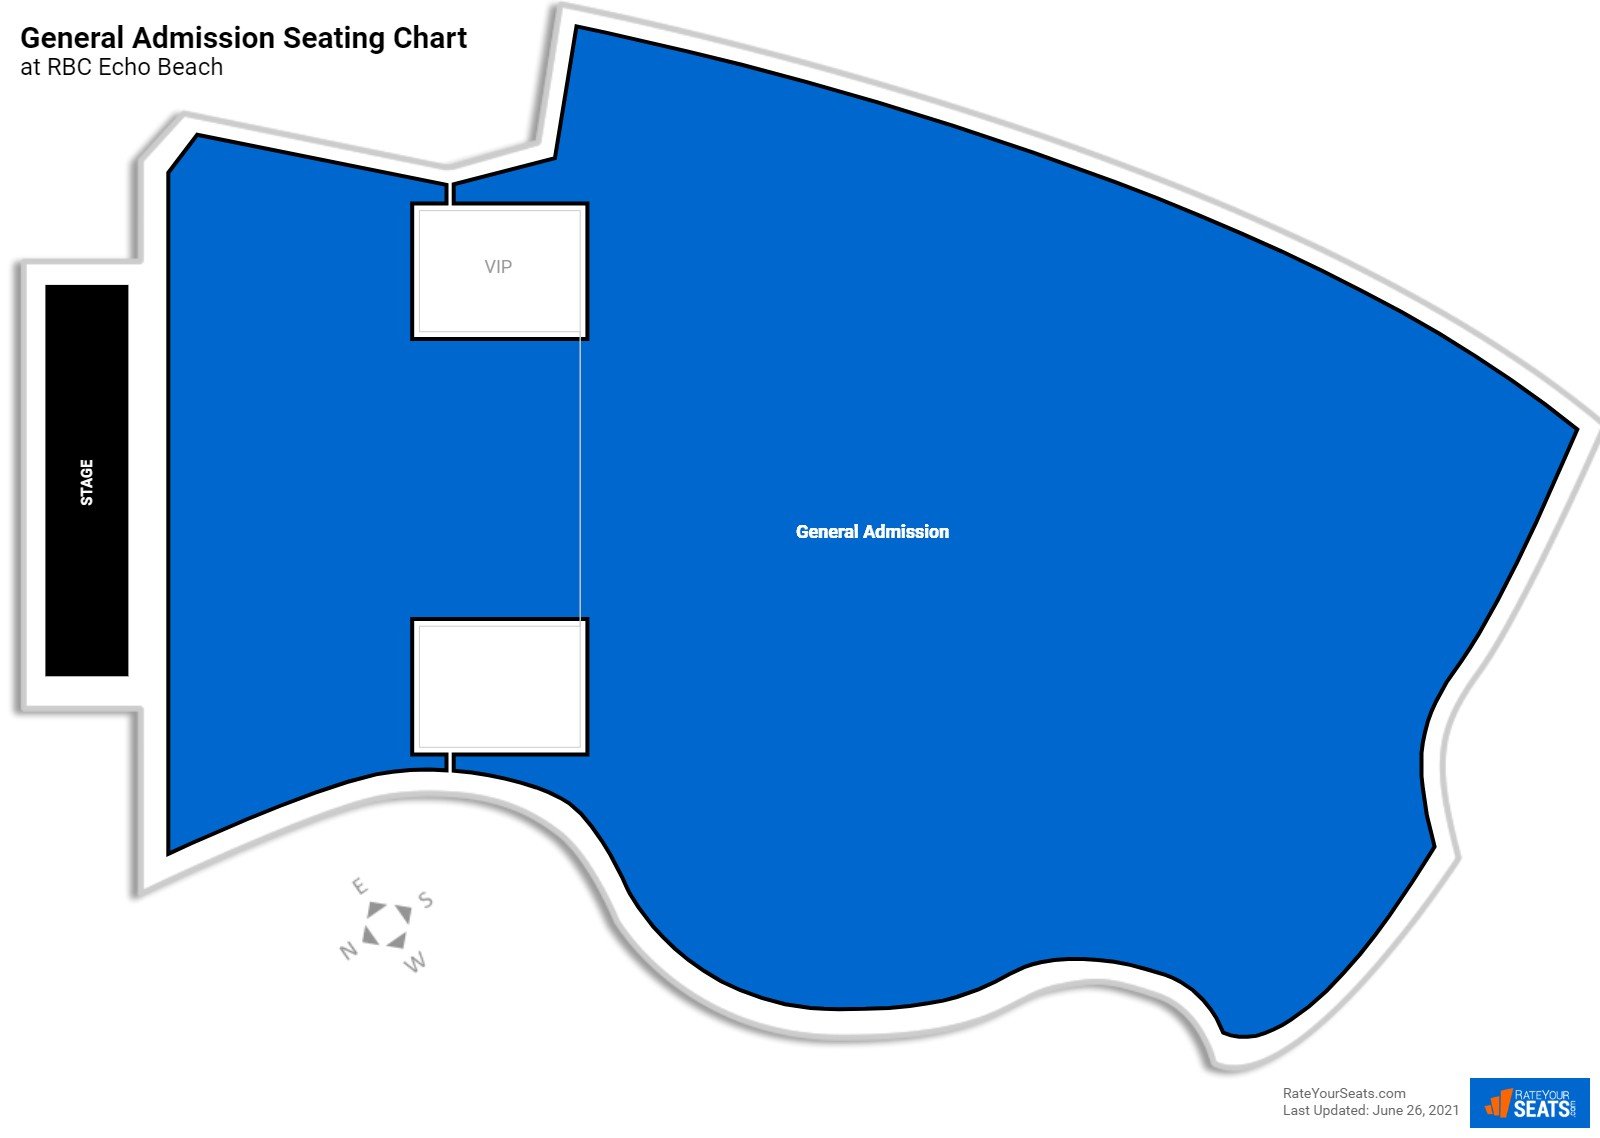 Concert General Admission Seating Chart at RBC Echo Beach